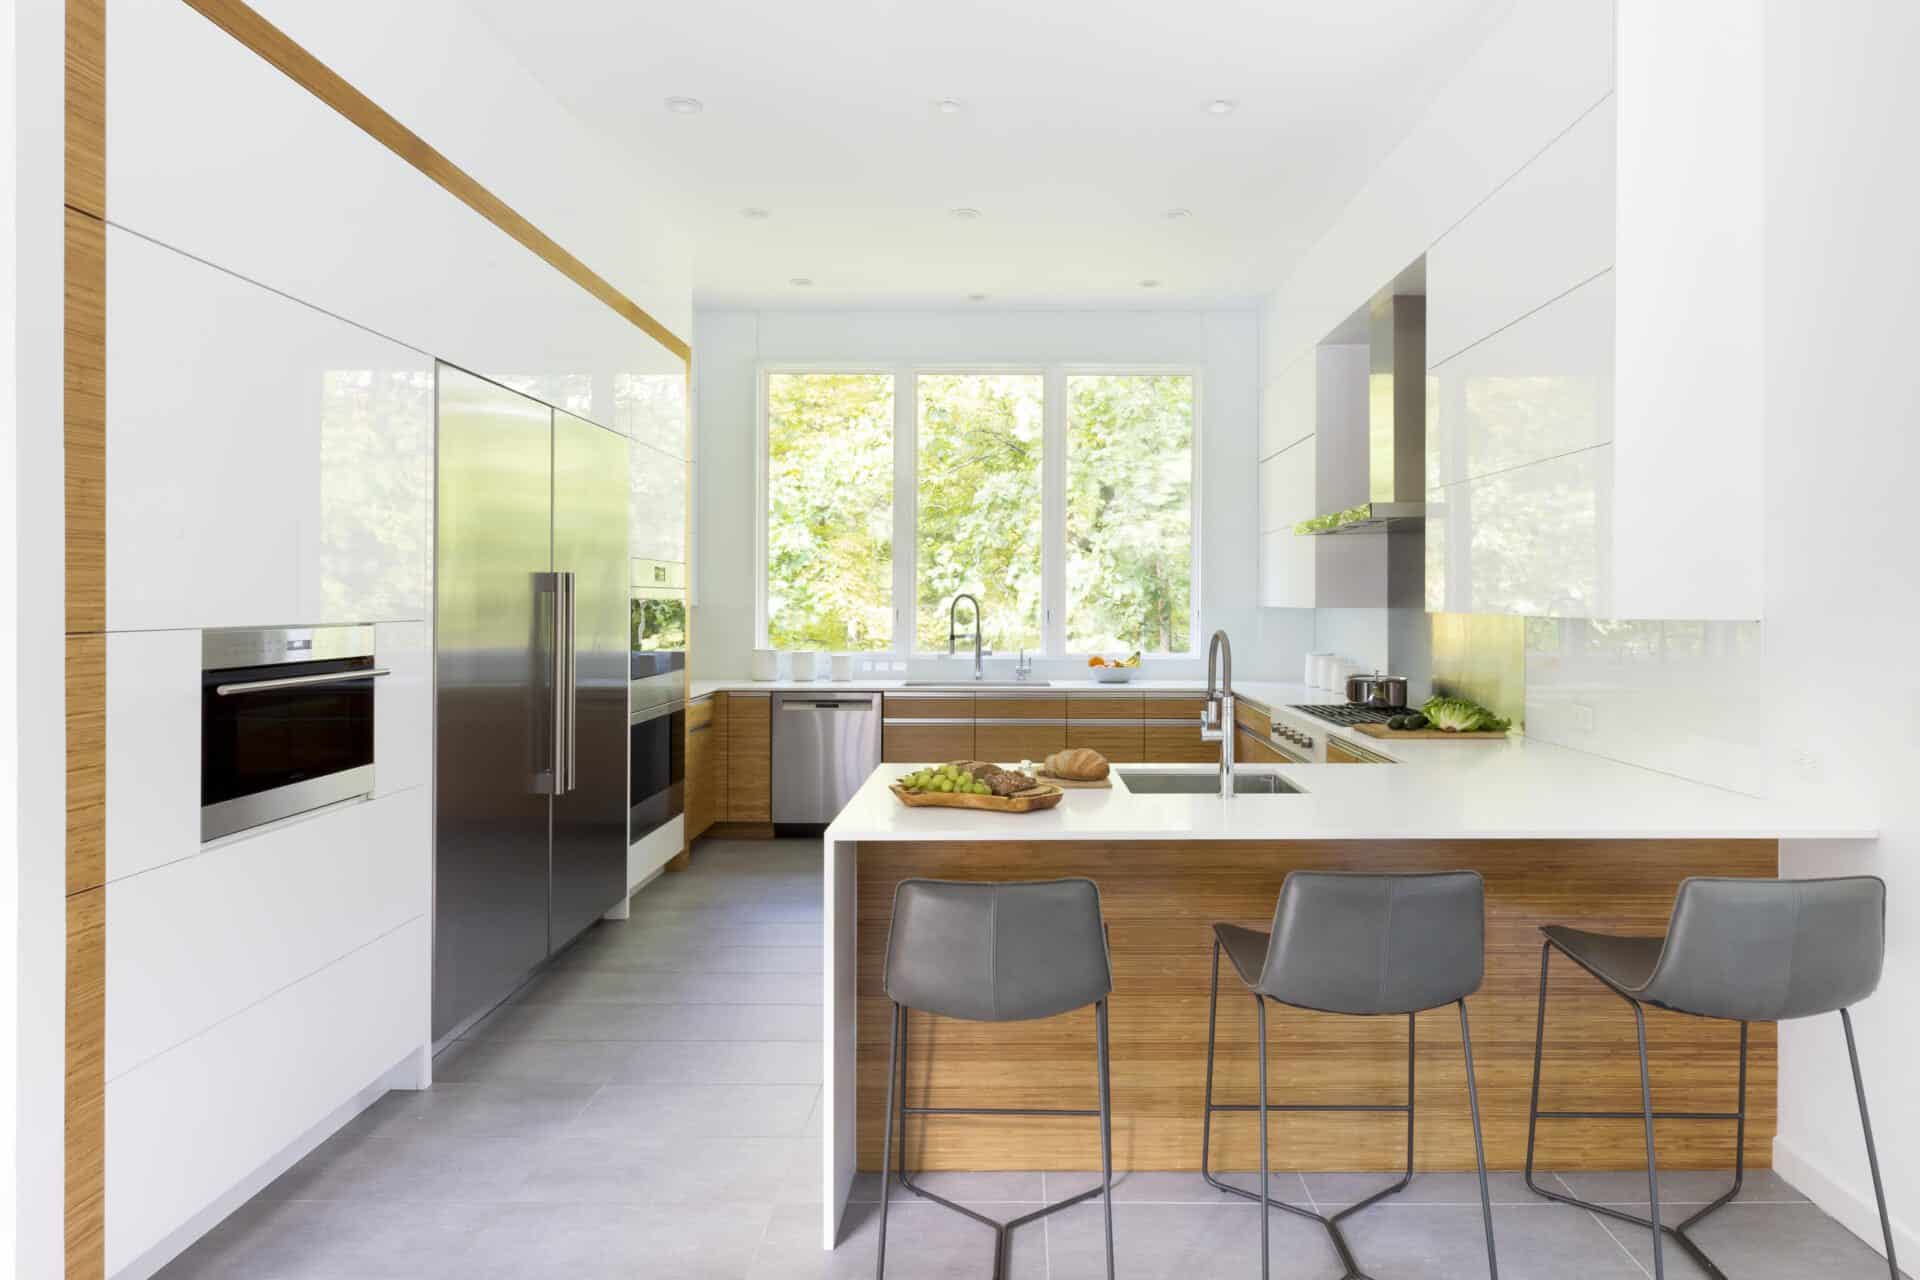 Contemrpoary Kitchen with a mix of Gloss White and Bamboo Cabinetry